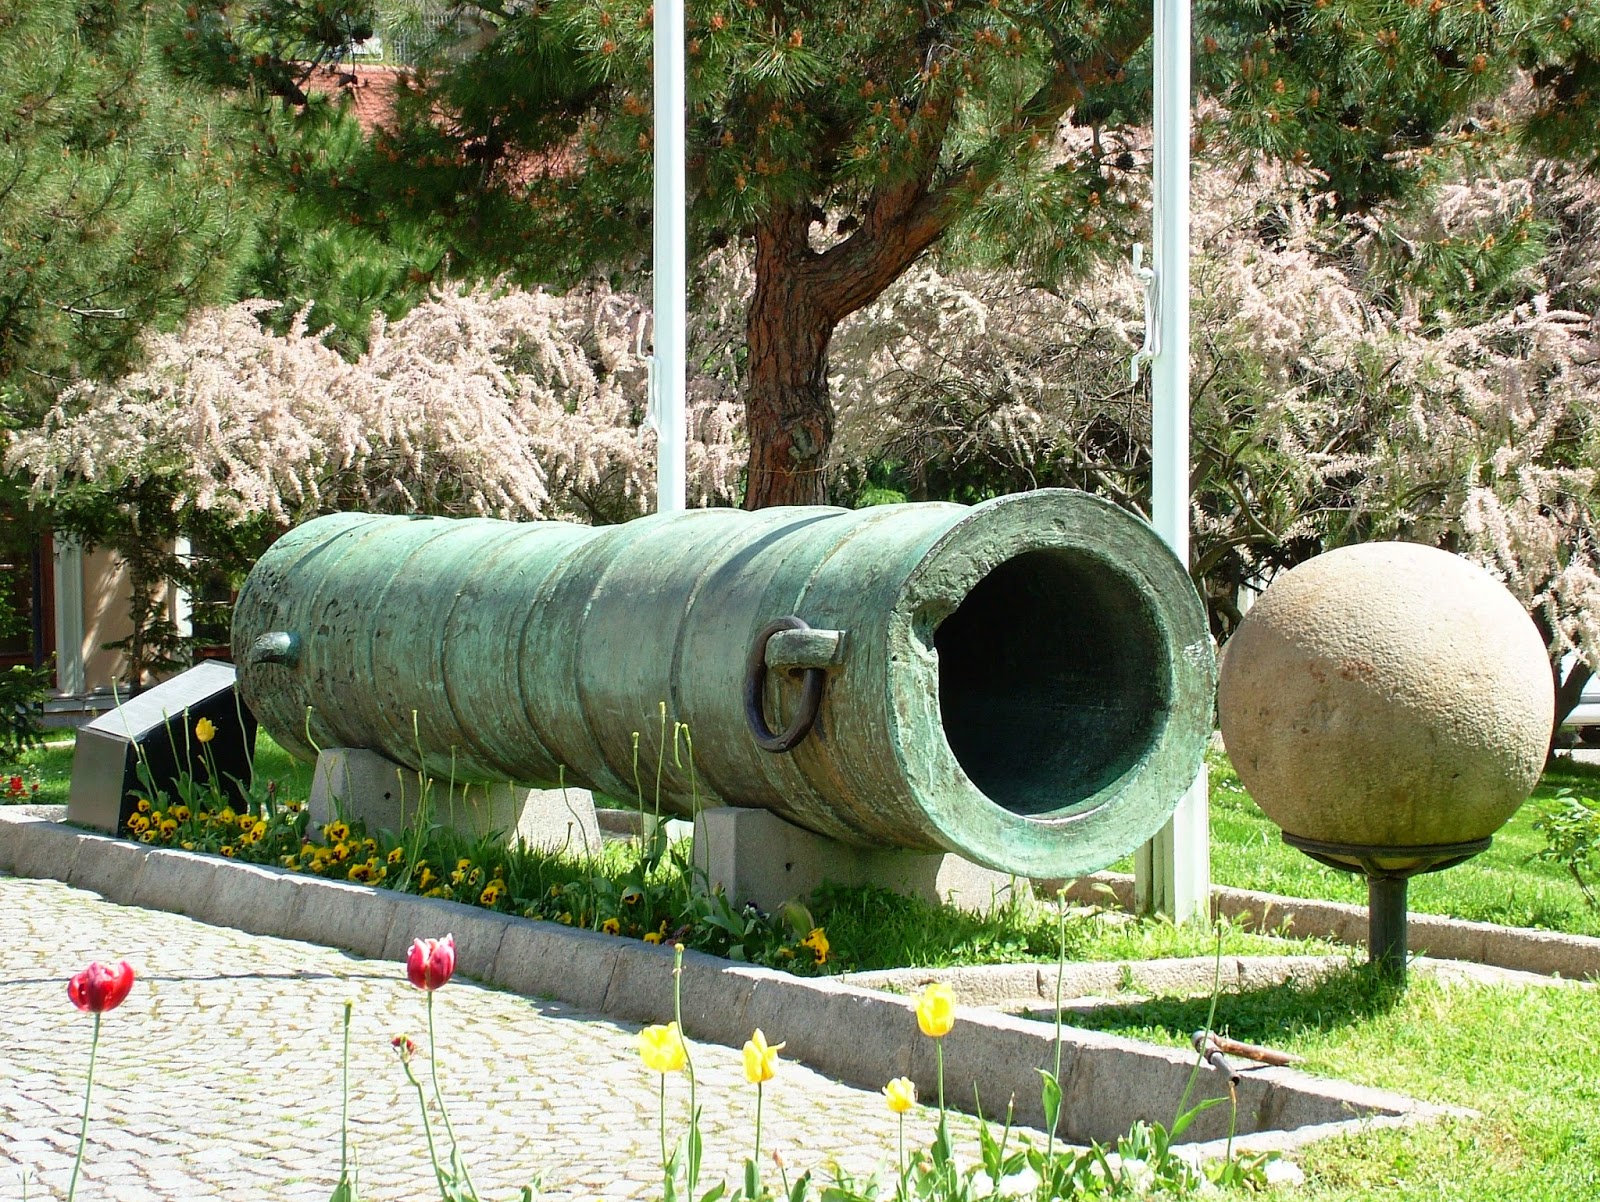 Turkish cannon and ball